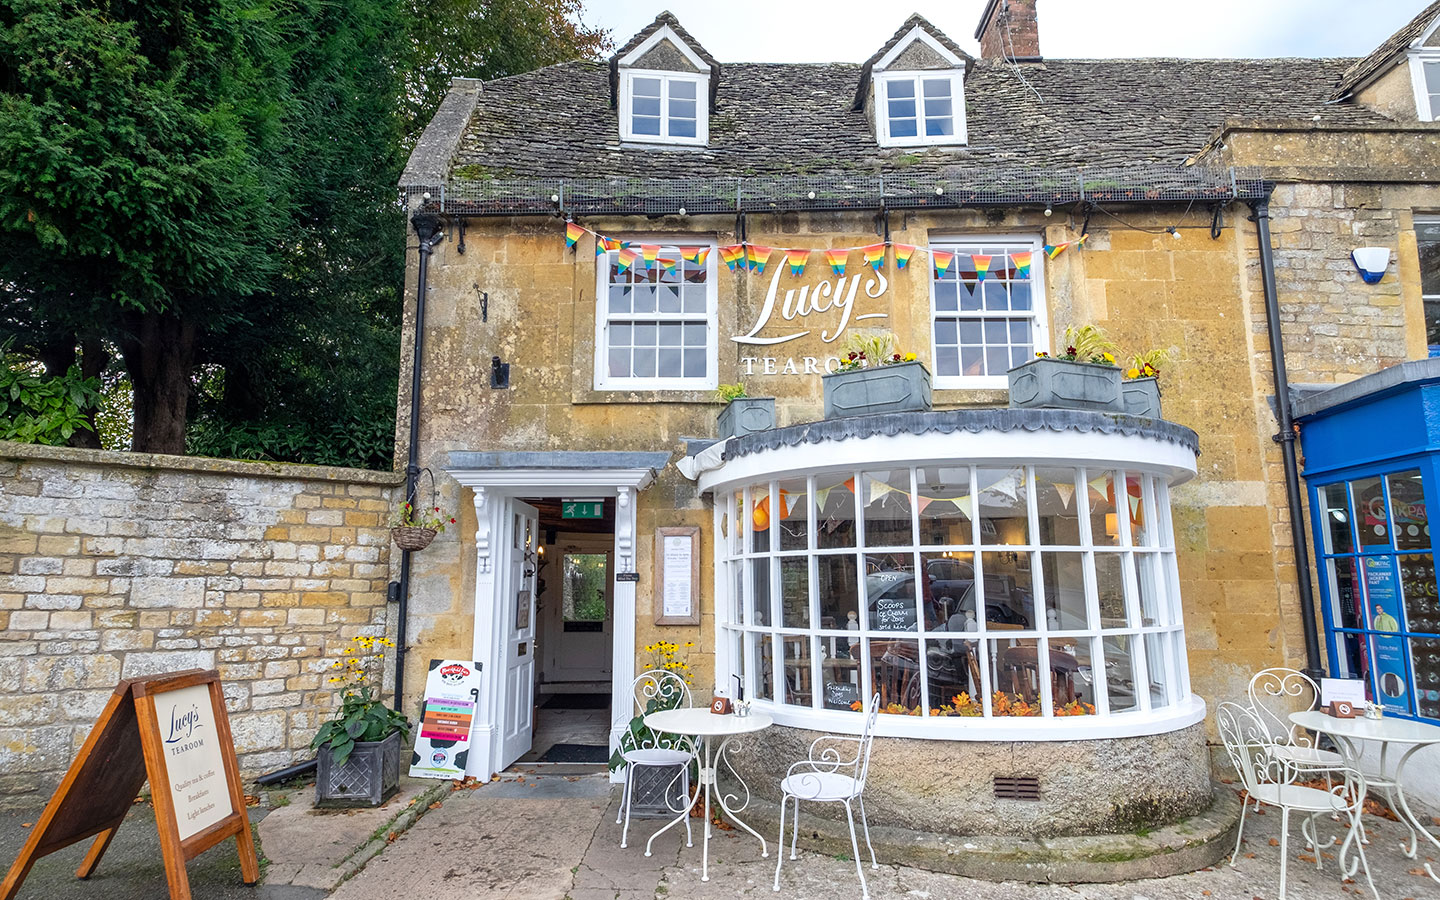 Lucy's Tearoom in Stow-on-the-Wold